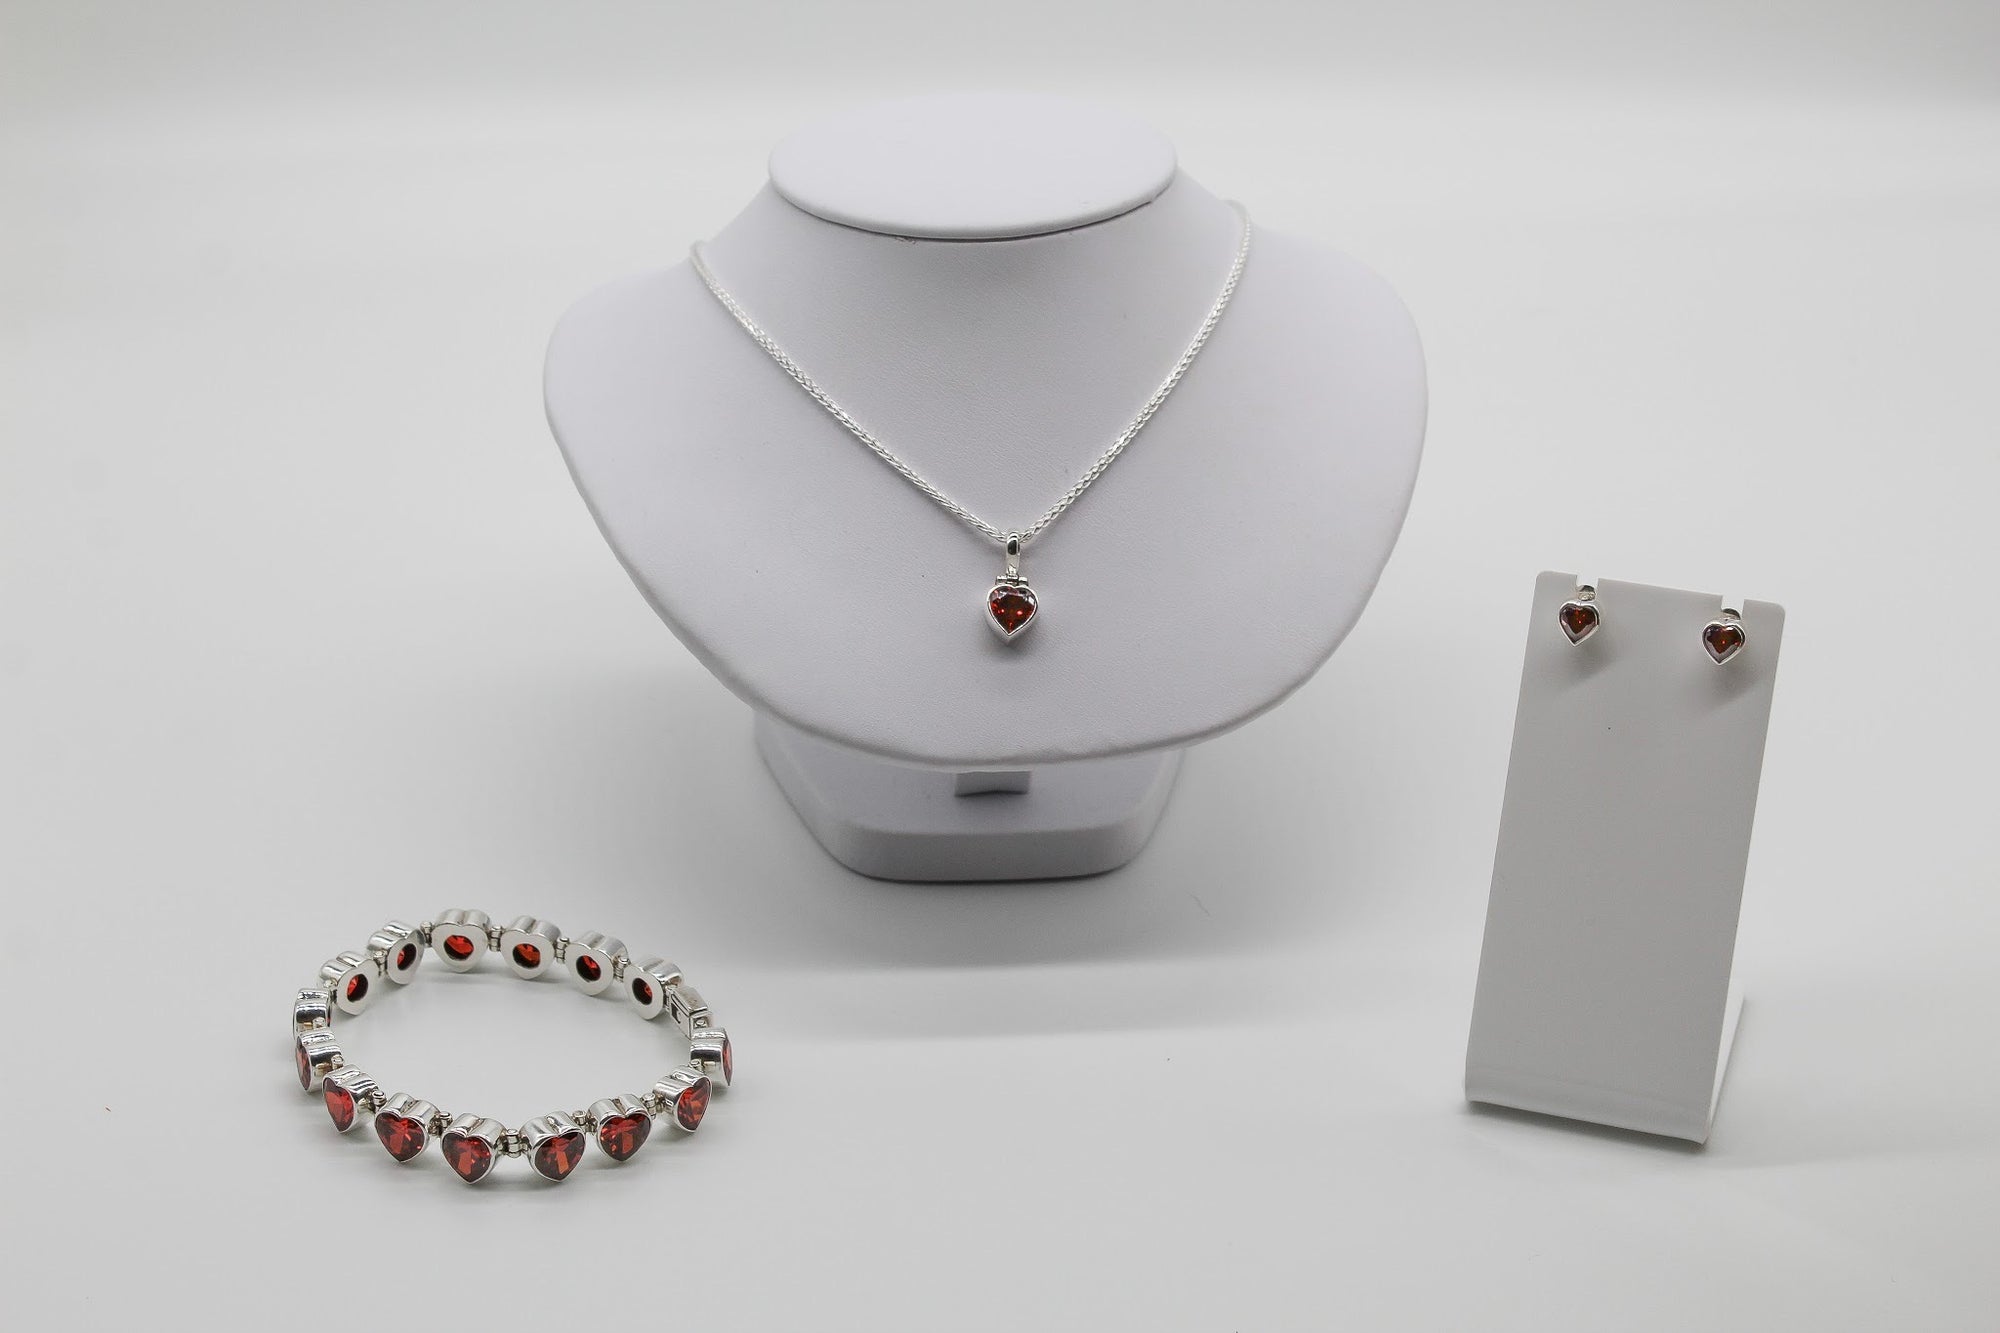 Heart Zirconia Necklace and Earrings Set